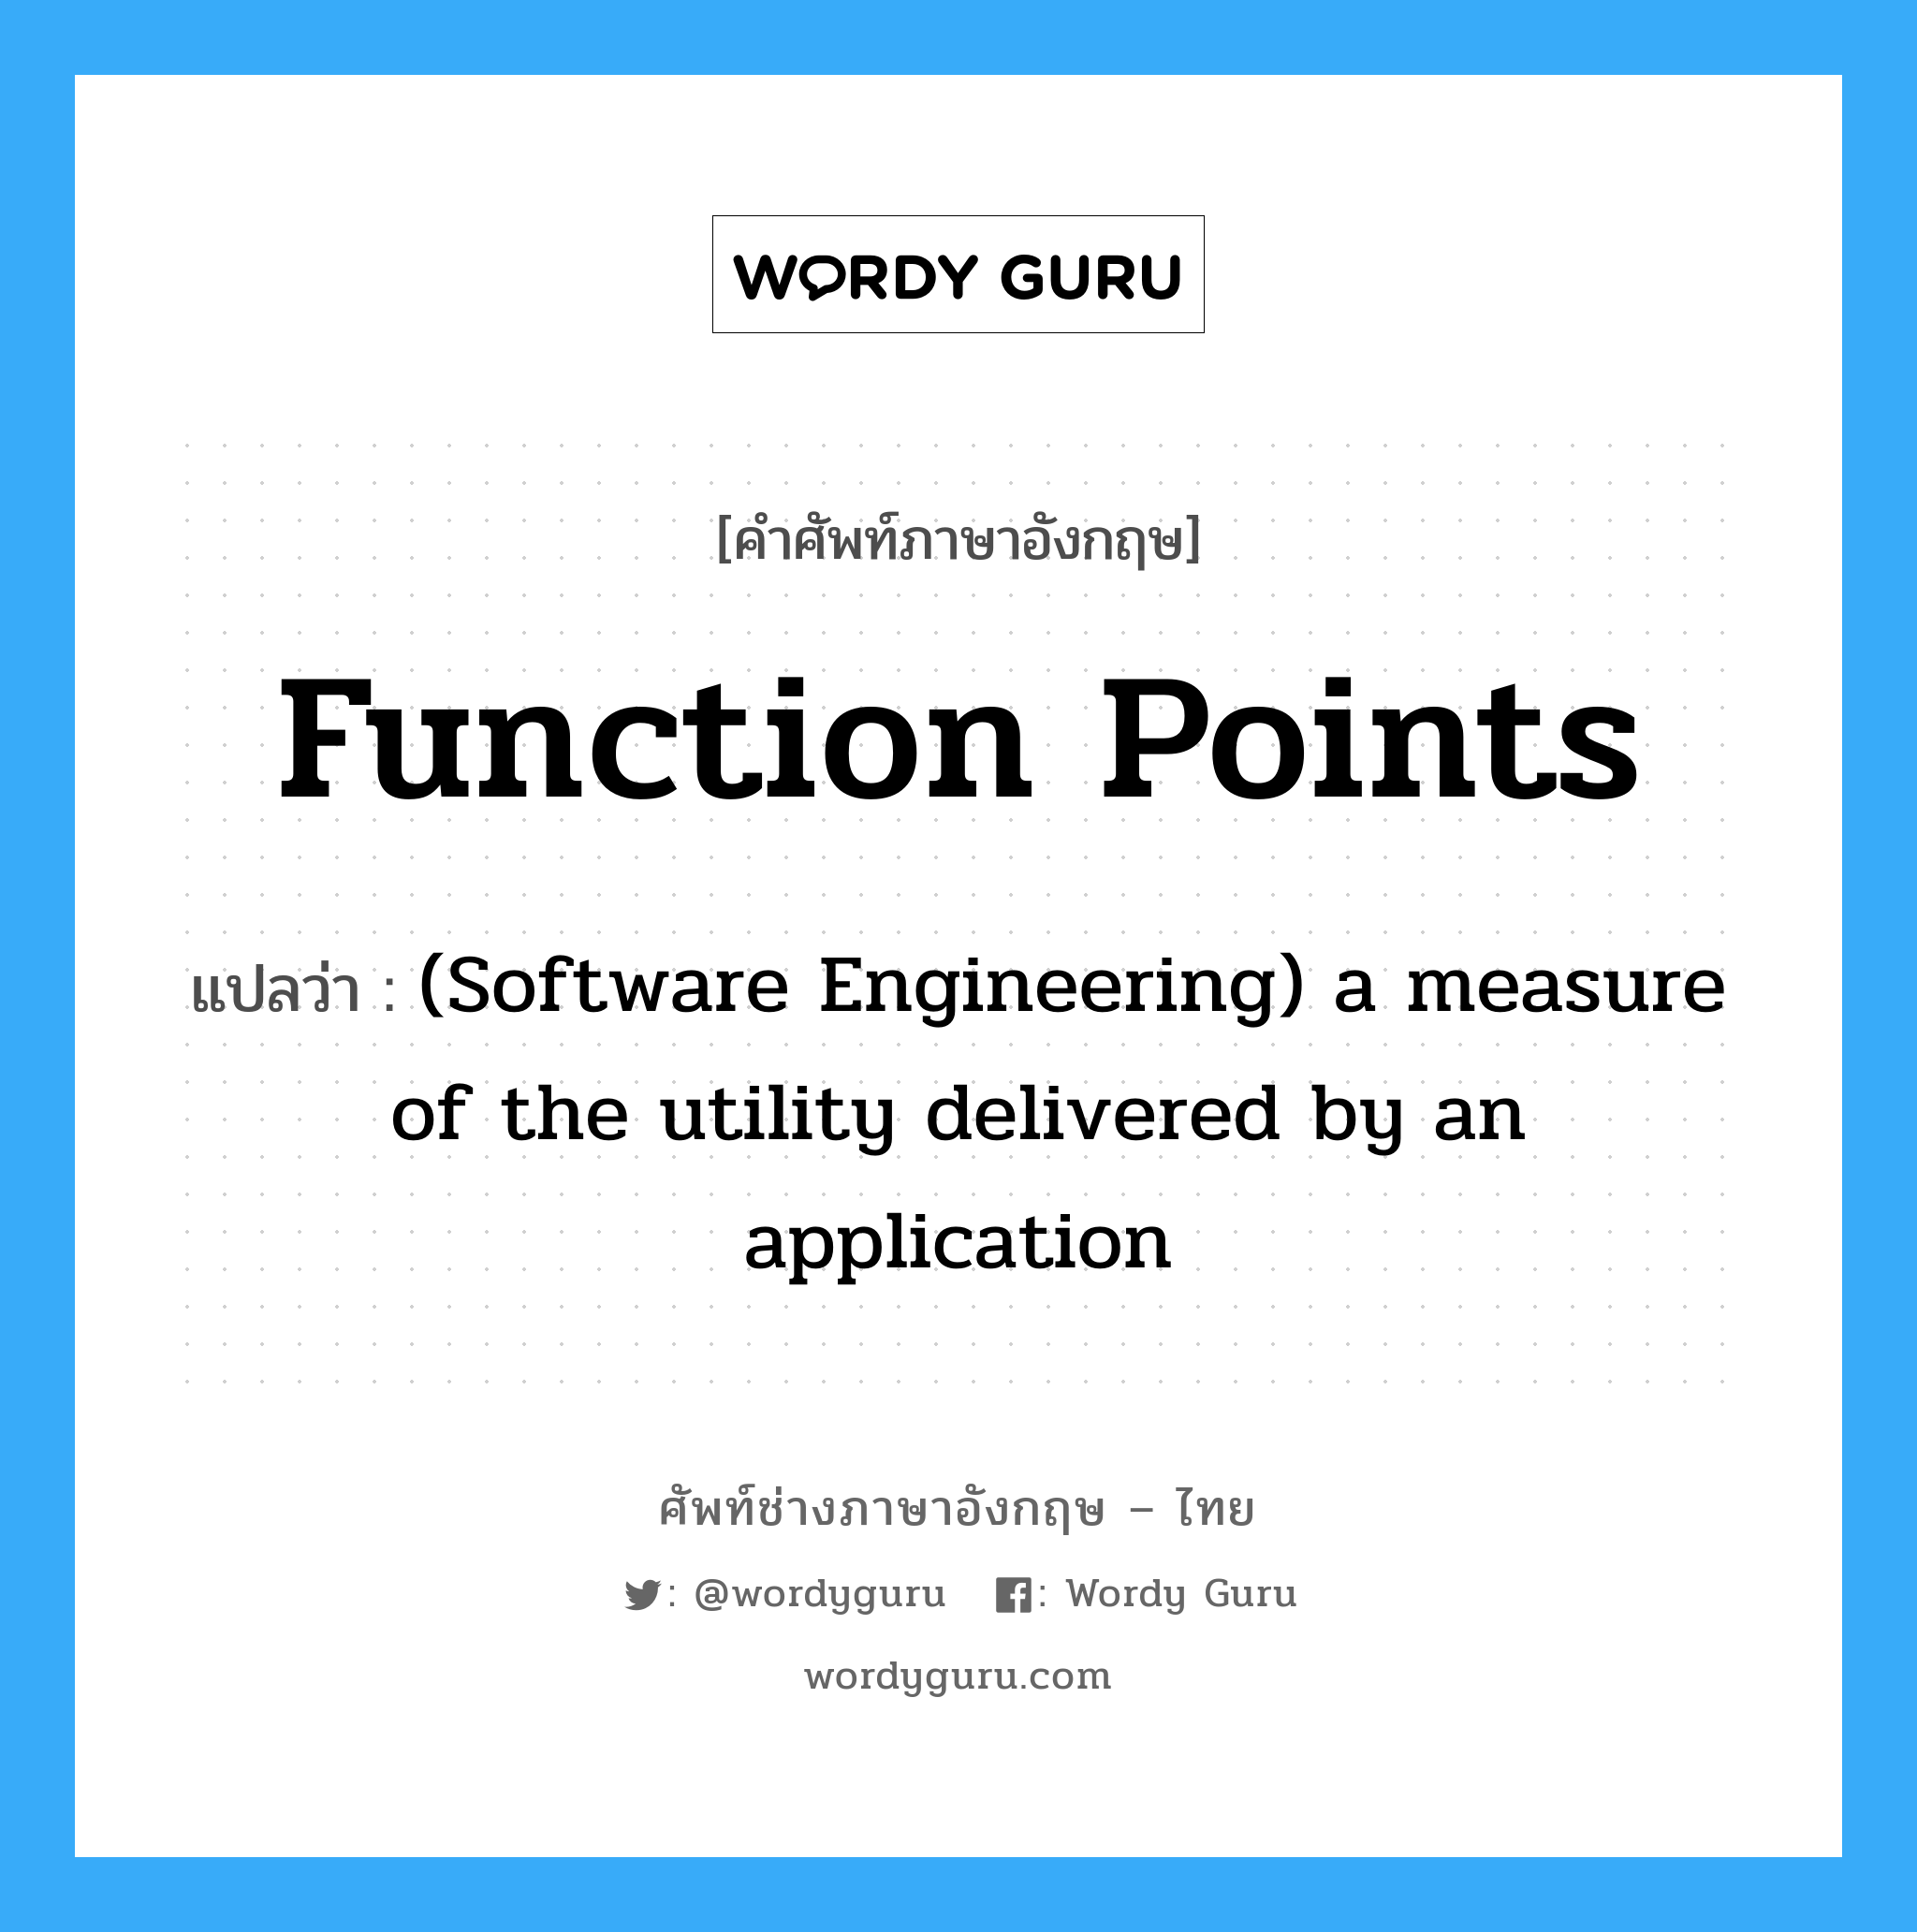 Function points แปลว่า?, คำศัพท์ช่างภาษาอังกฤษ - ไทย Function points คำศัพท์ภาษาอังกฤษ Function points แปลว่า (Software Engineering) a measure of the utility delivered by an application